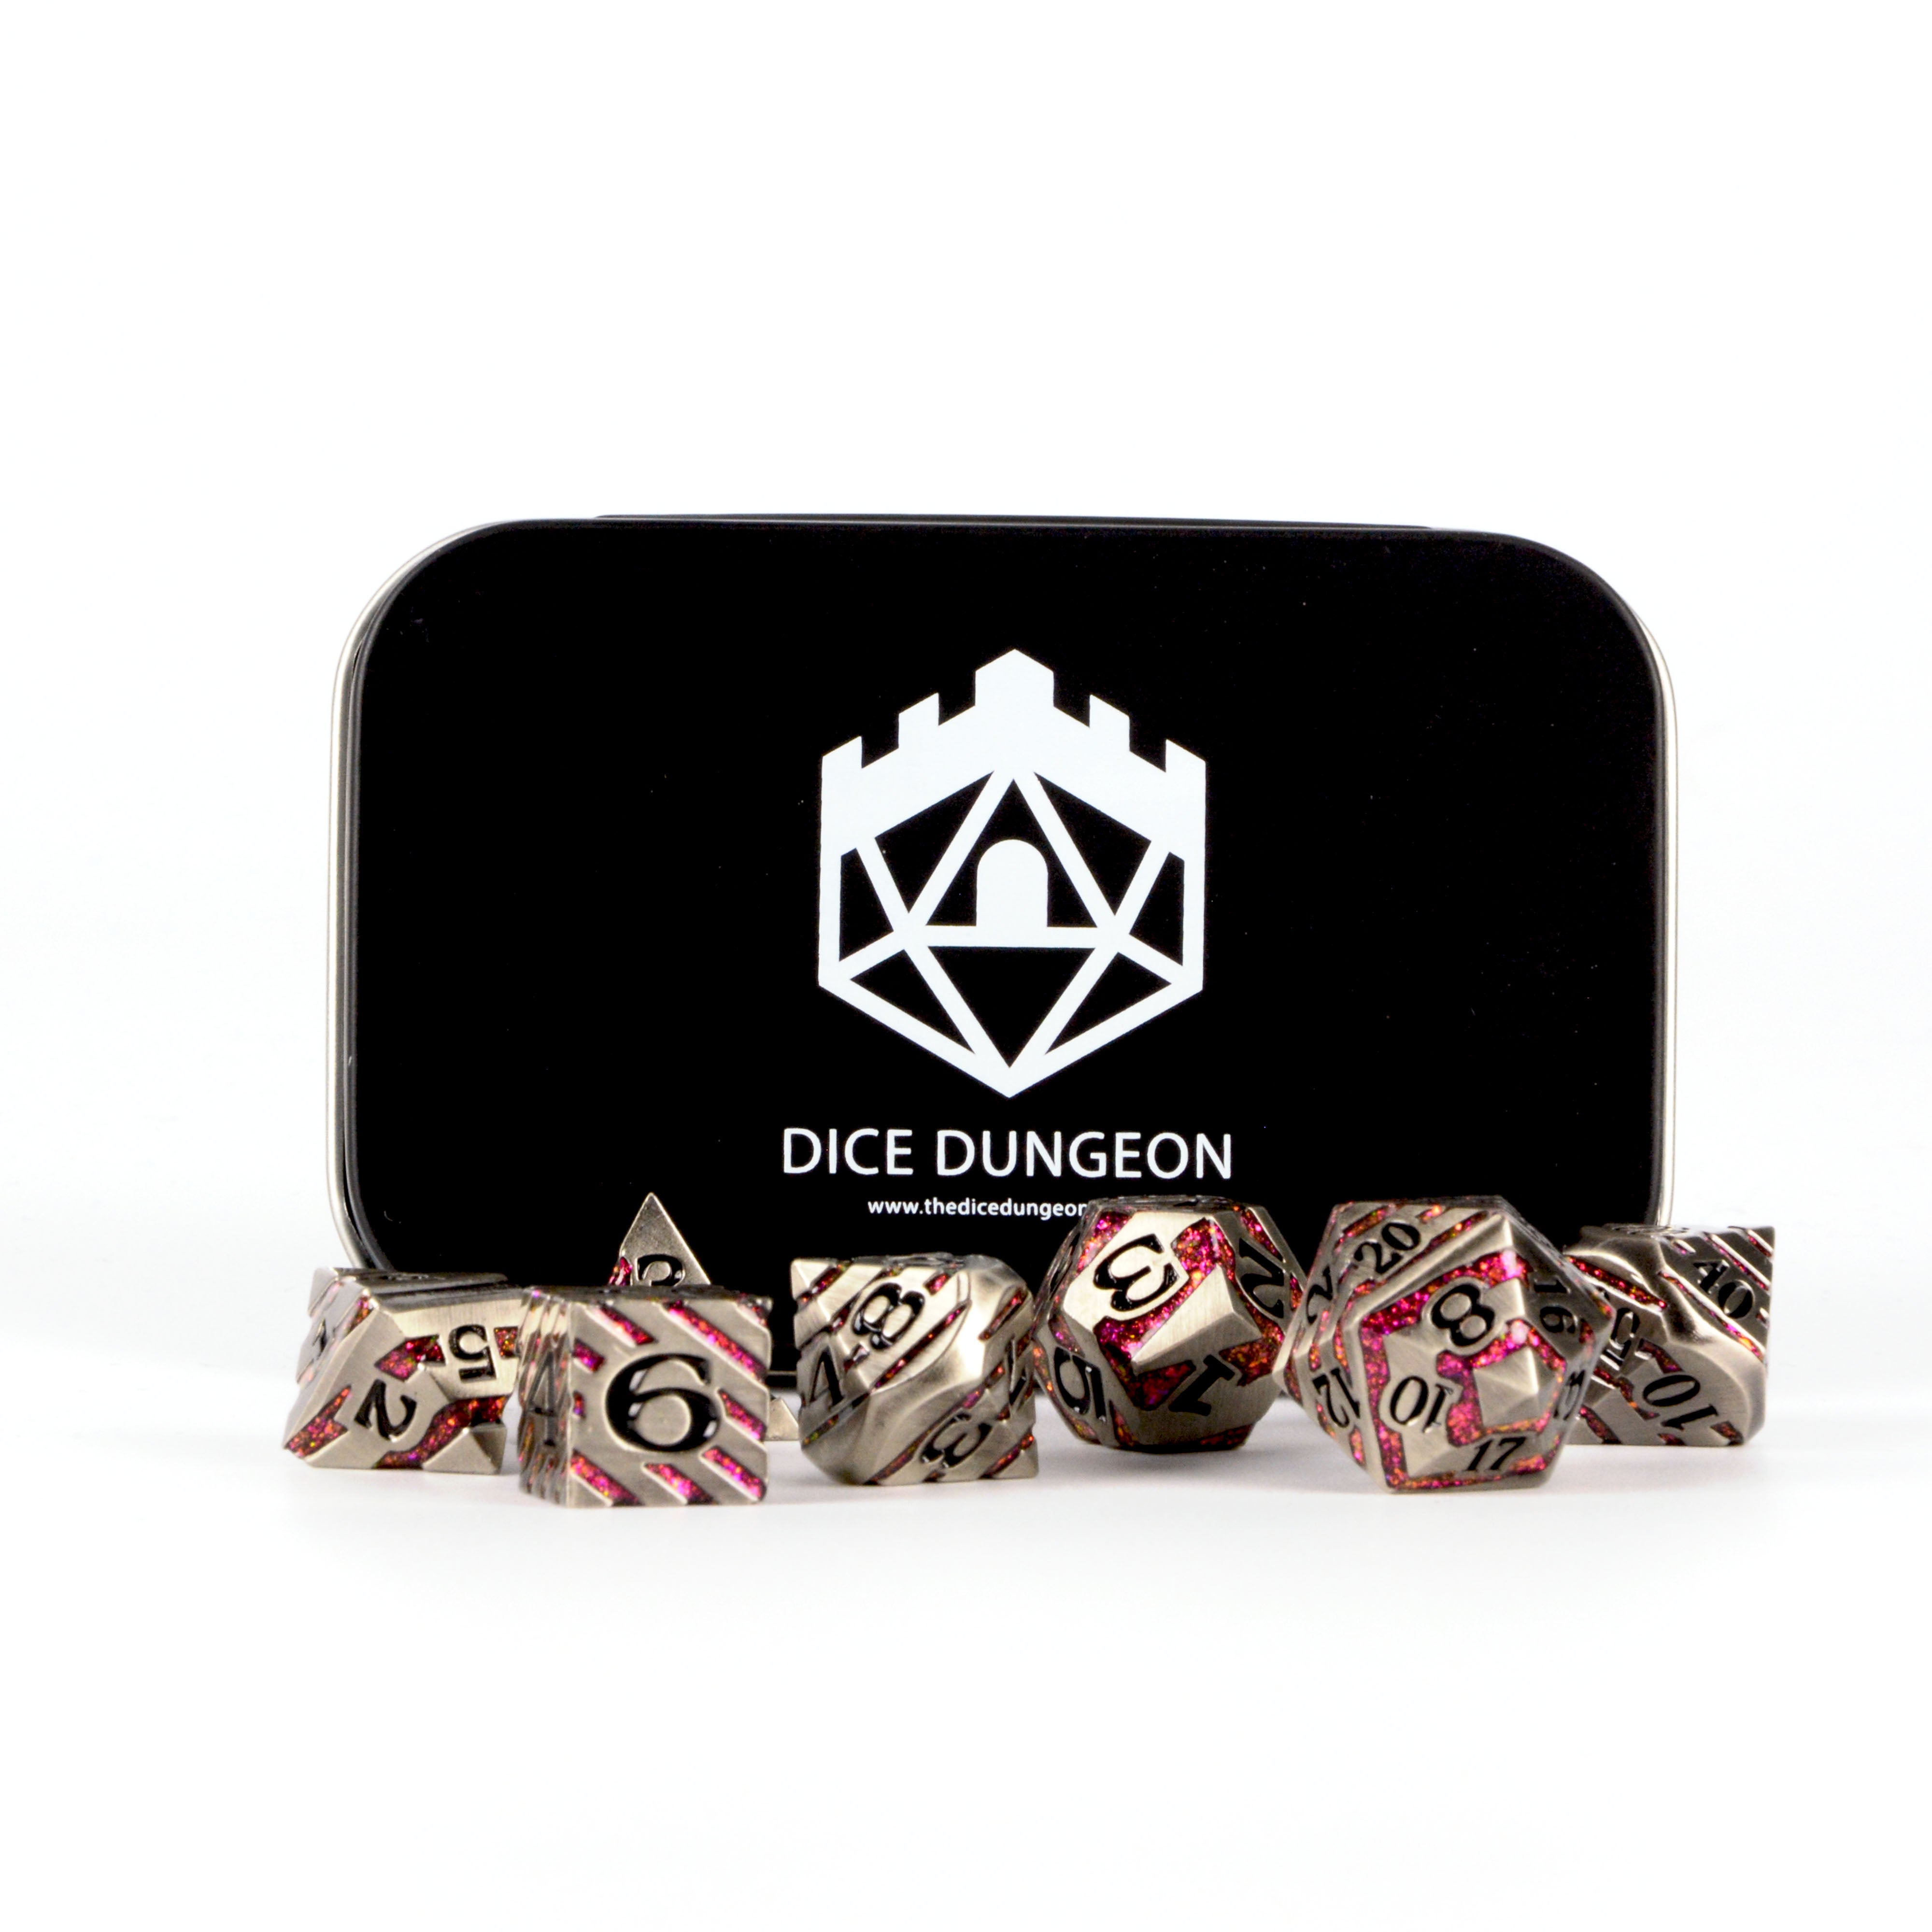 legendary ore bloodstone dnd dice with tin